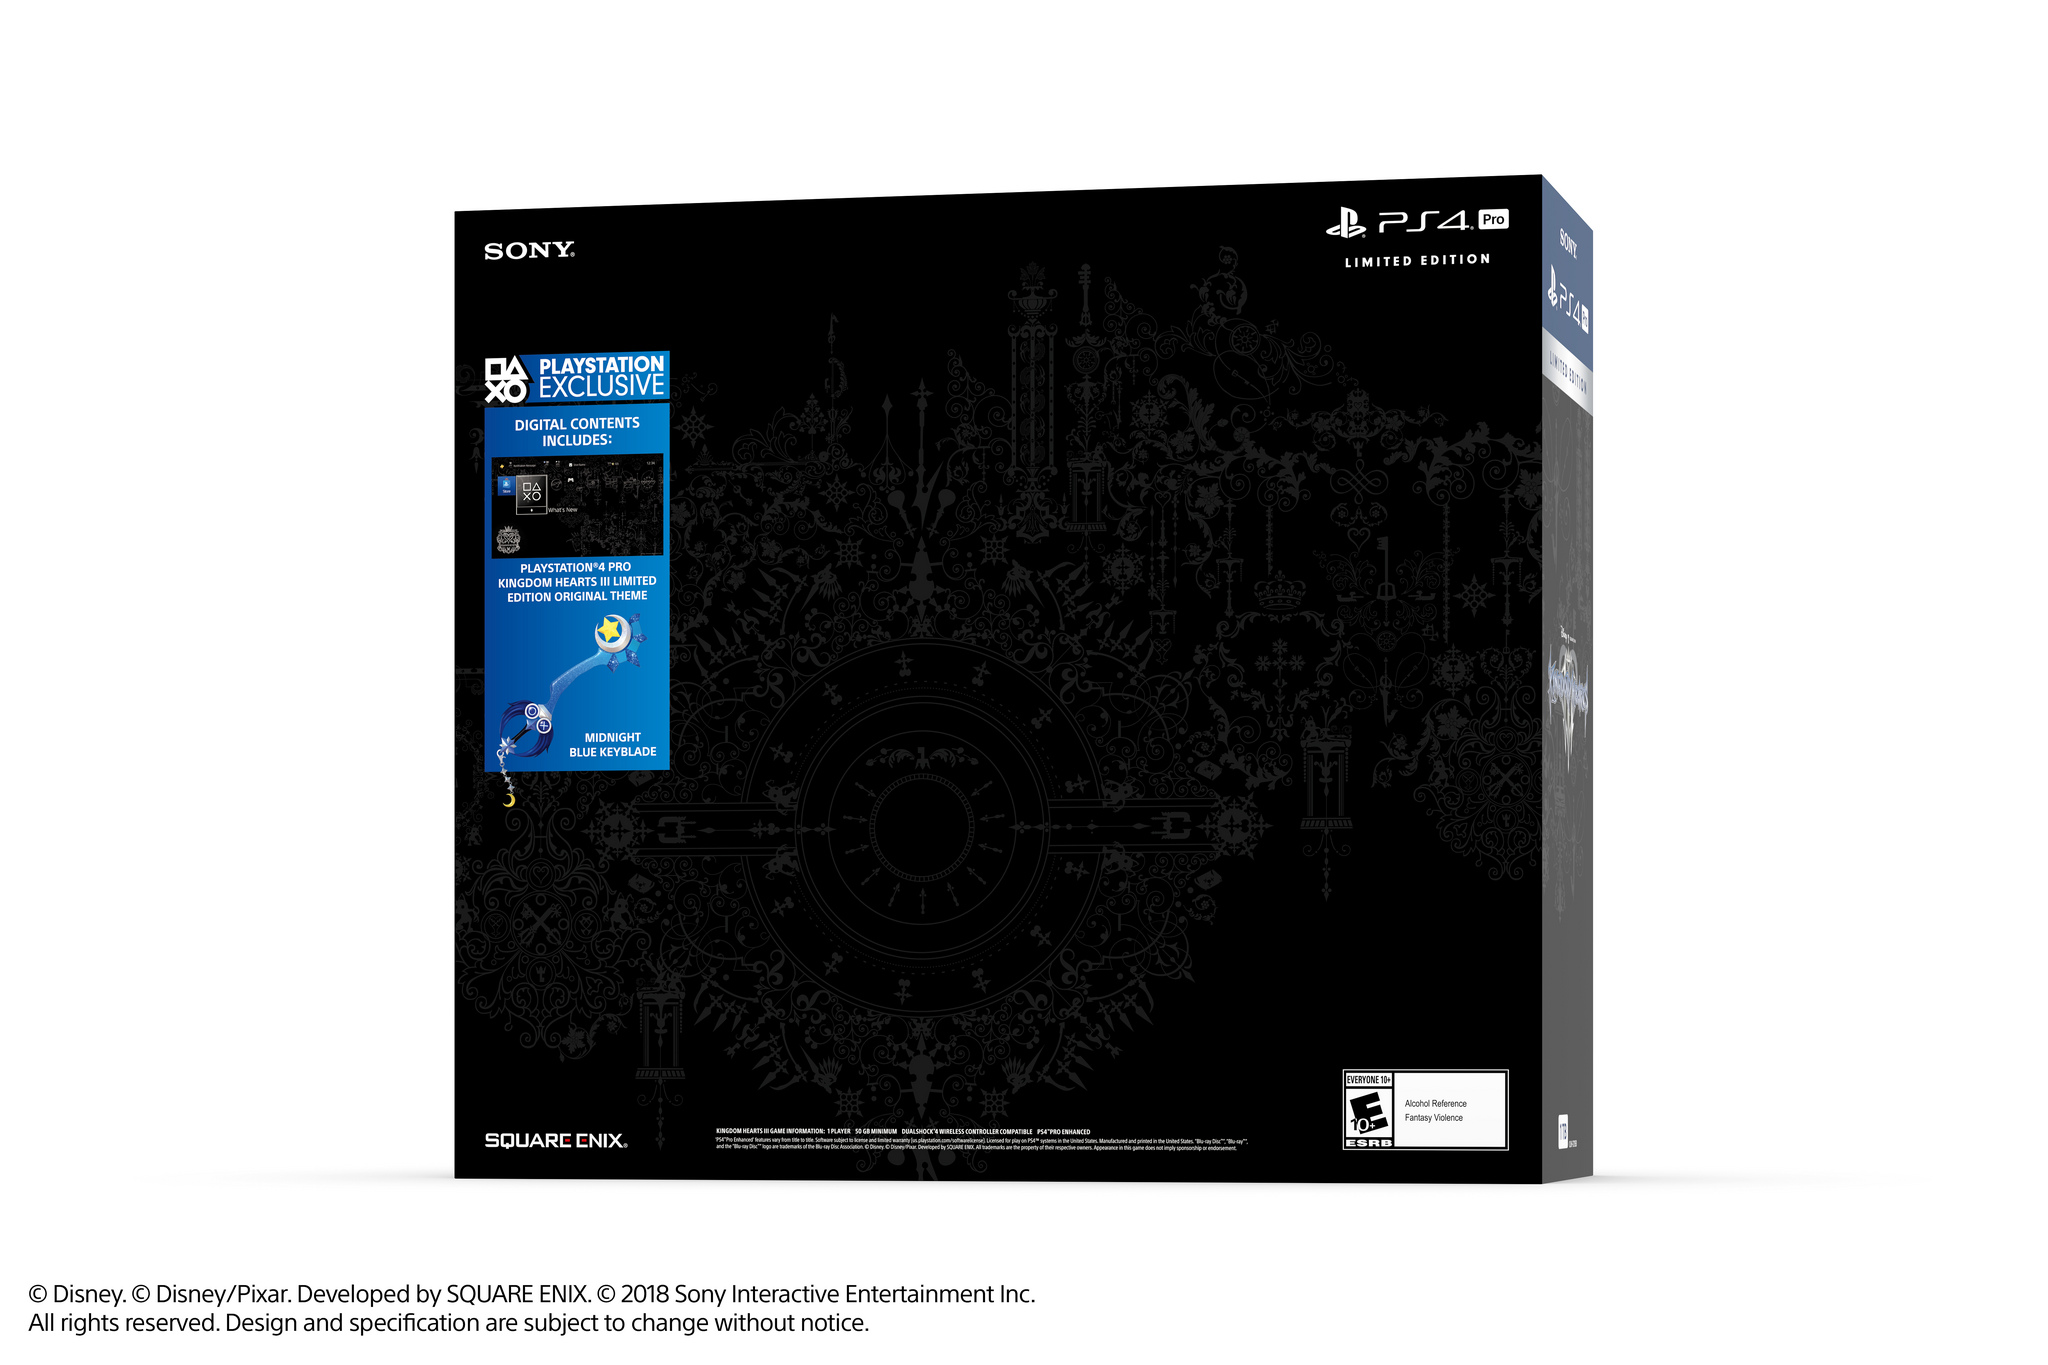 Limited Edition Kingdom Hearts III PS4 Pro Places Release In January 2019